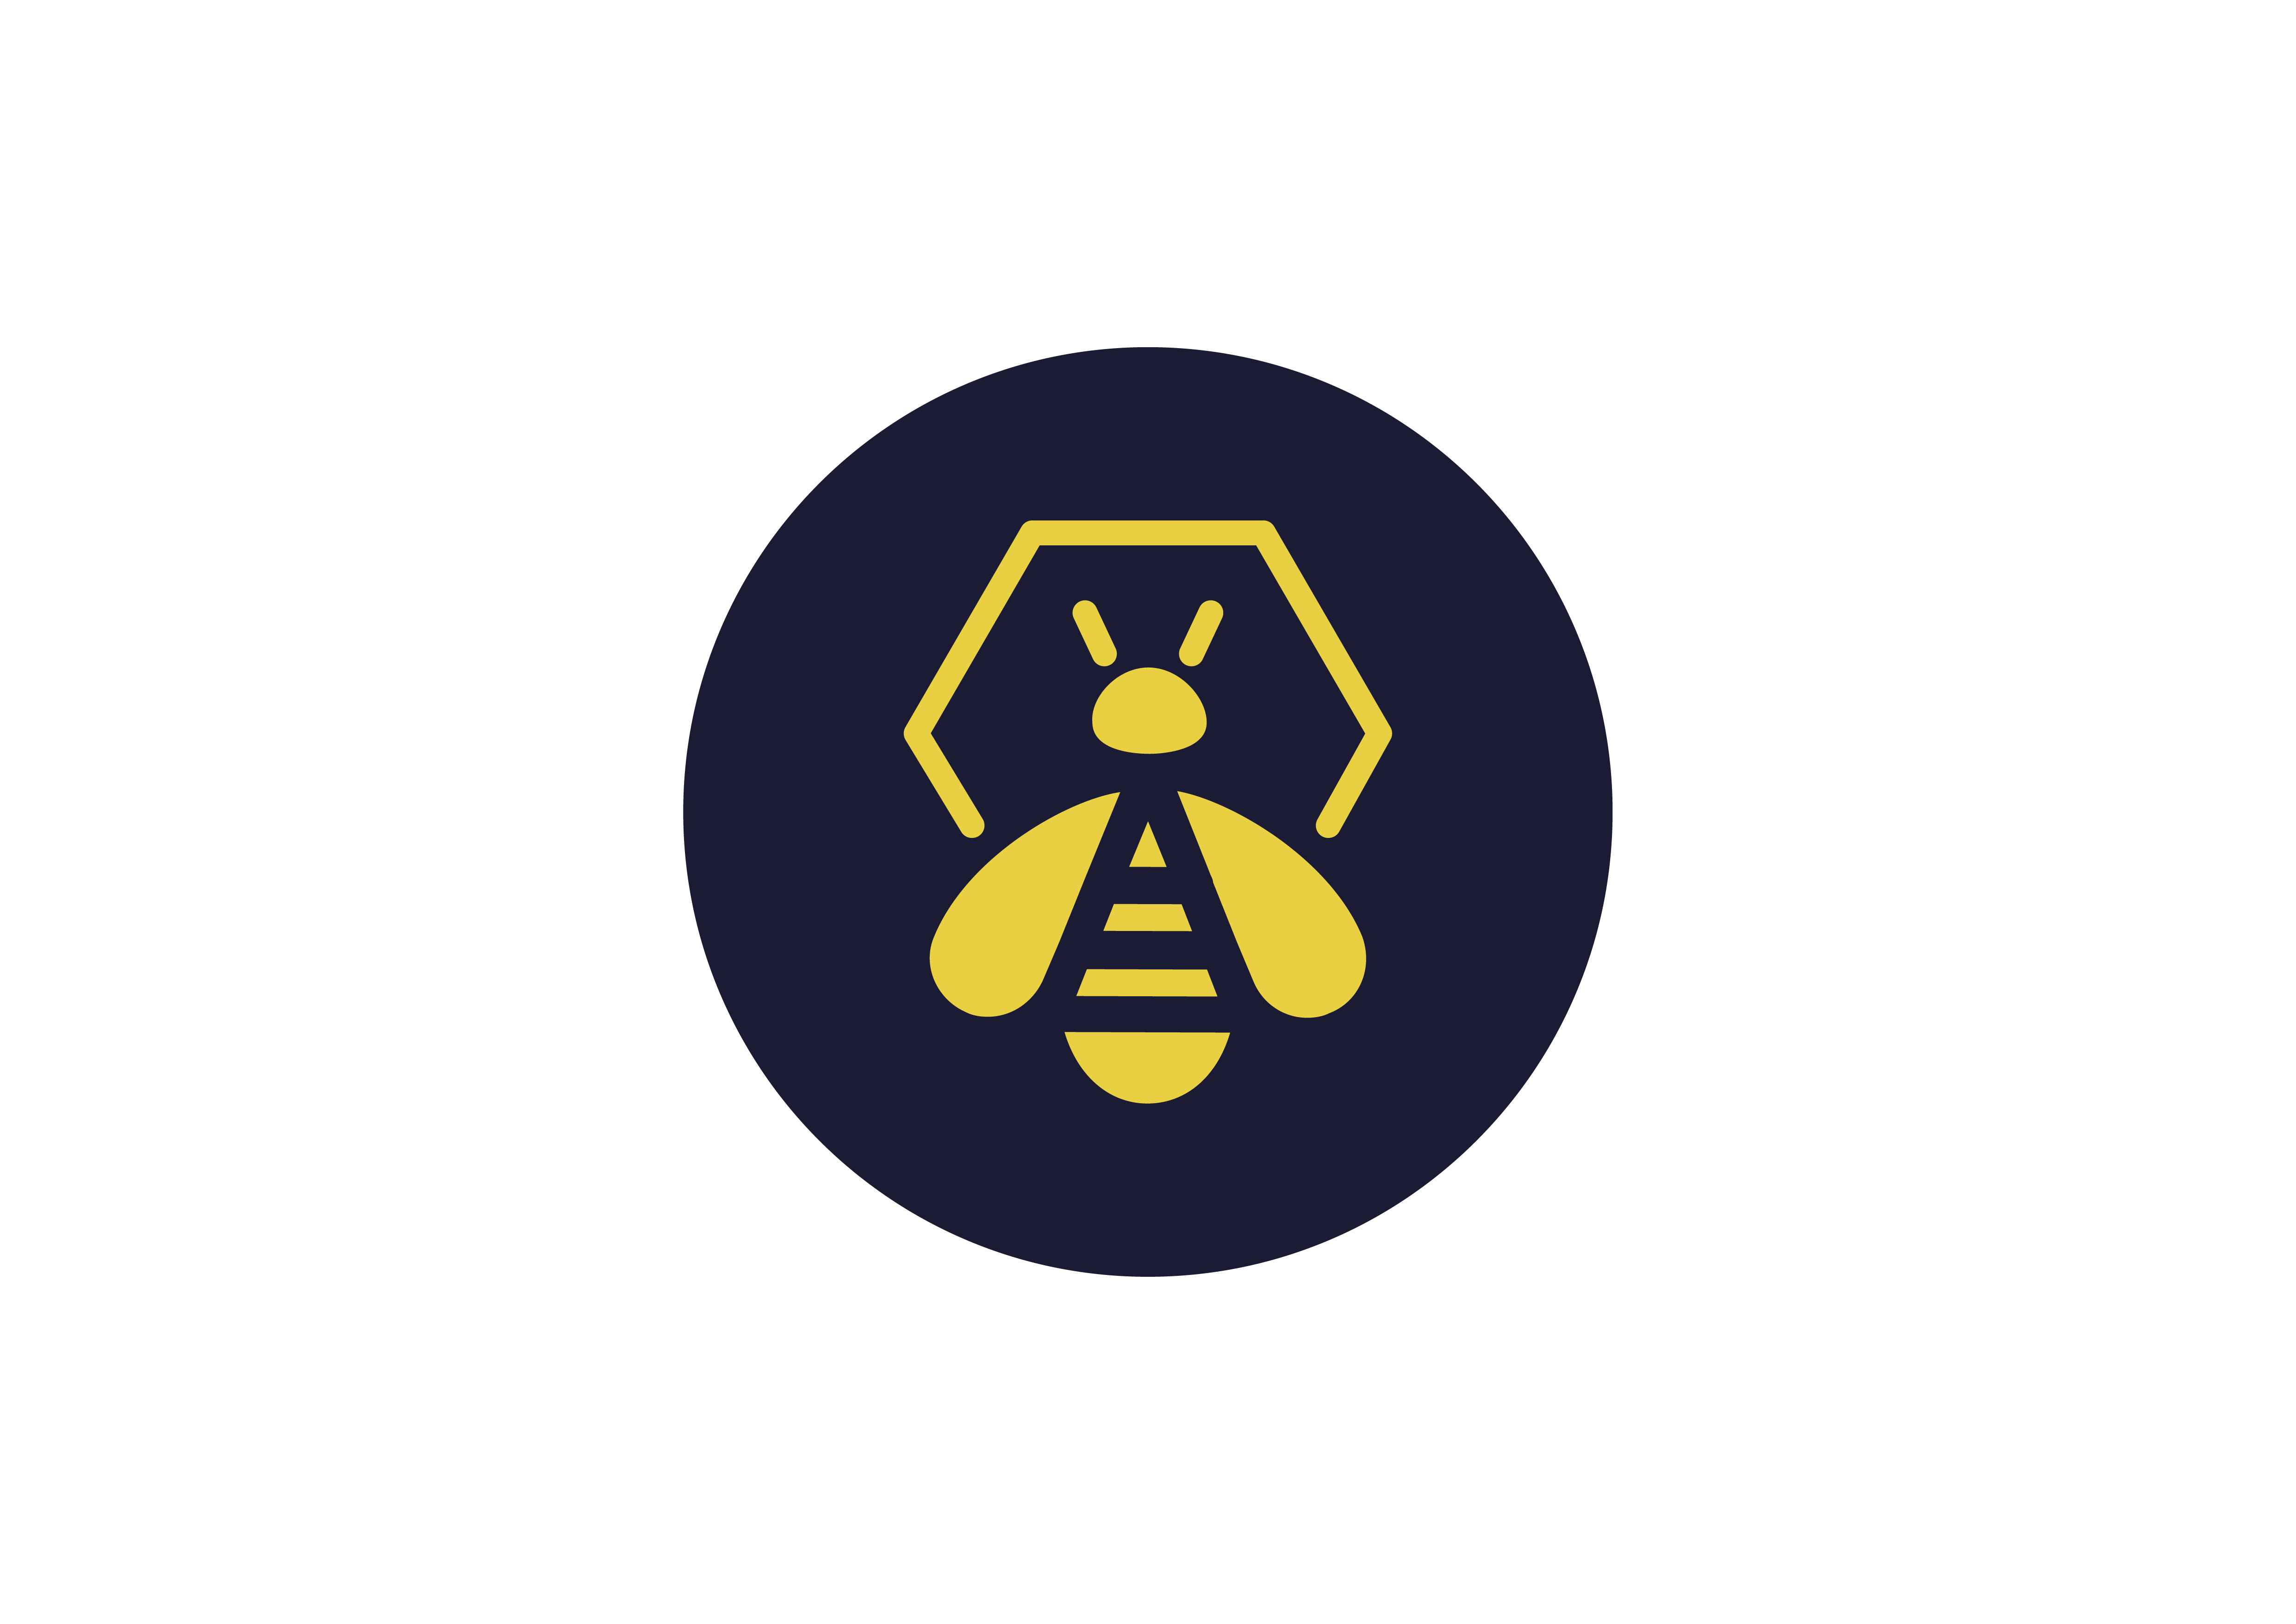 TheHive Project